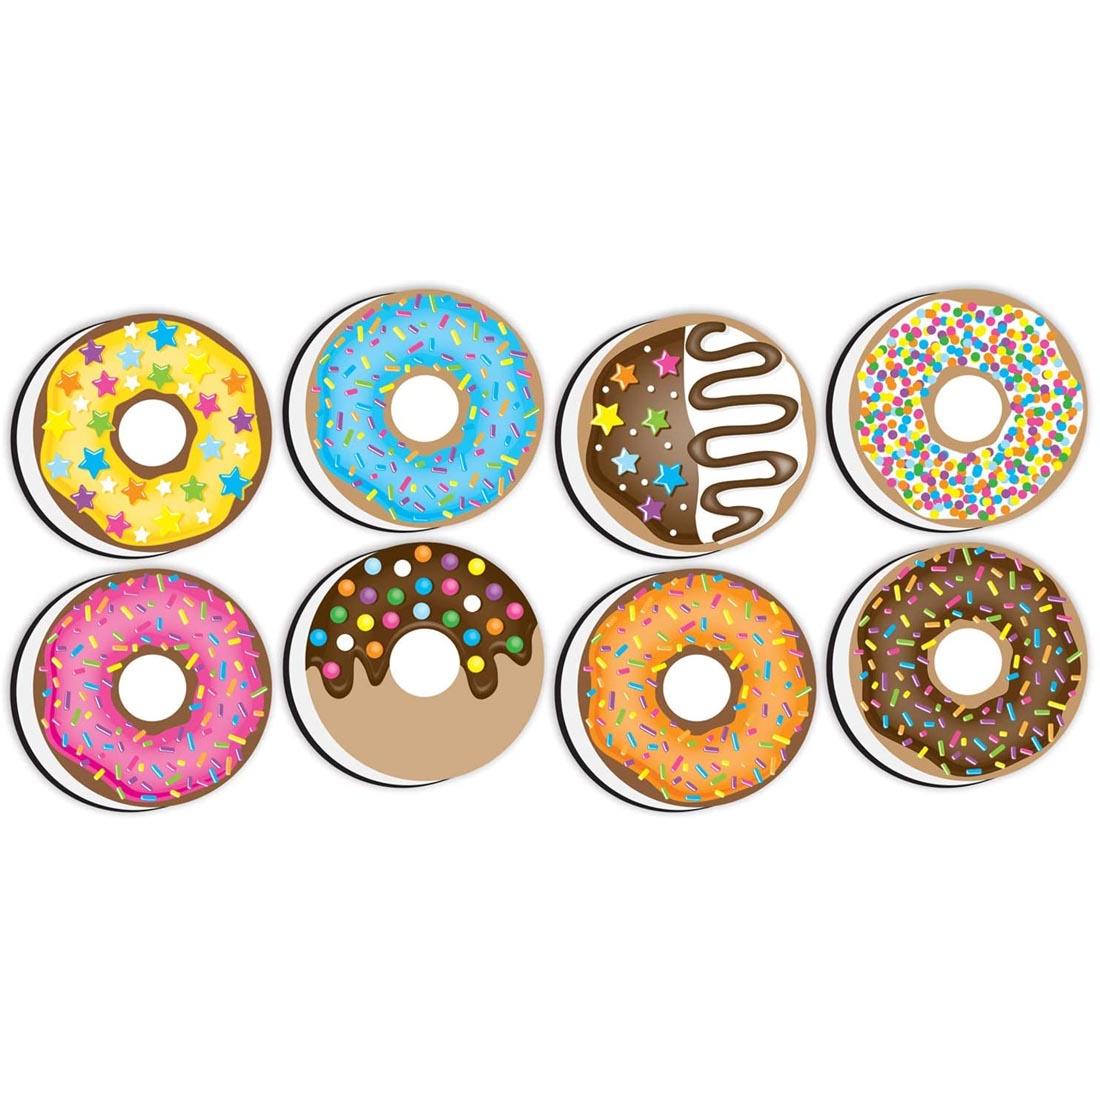 mini whiteboard erasers that look like a collection of frosted doughnuts